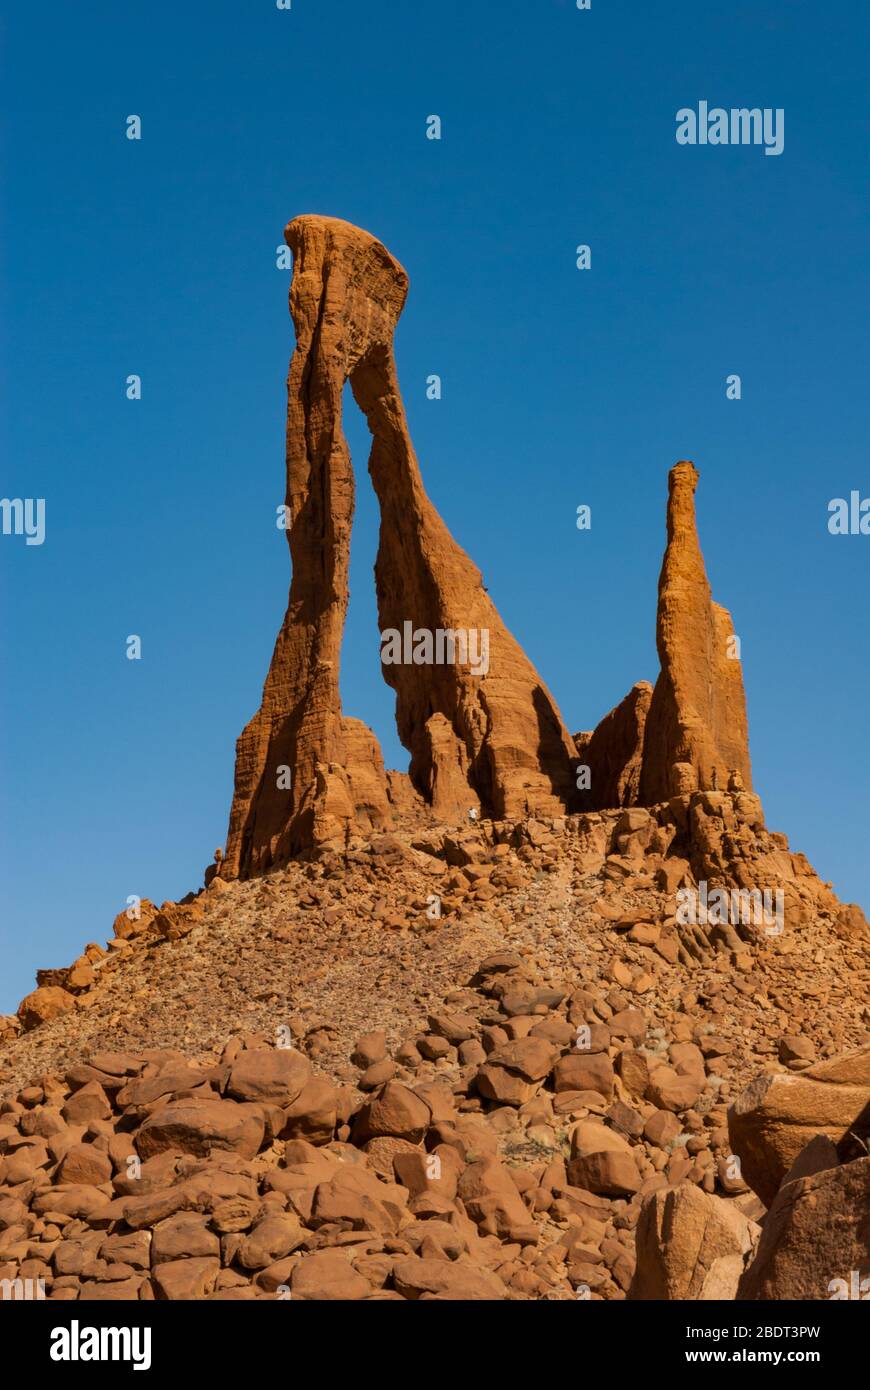 Abstract rocks formation in lyre shape at plateau Ennedi, in Sahara desert, Chad, Adrica Stock Photo